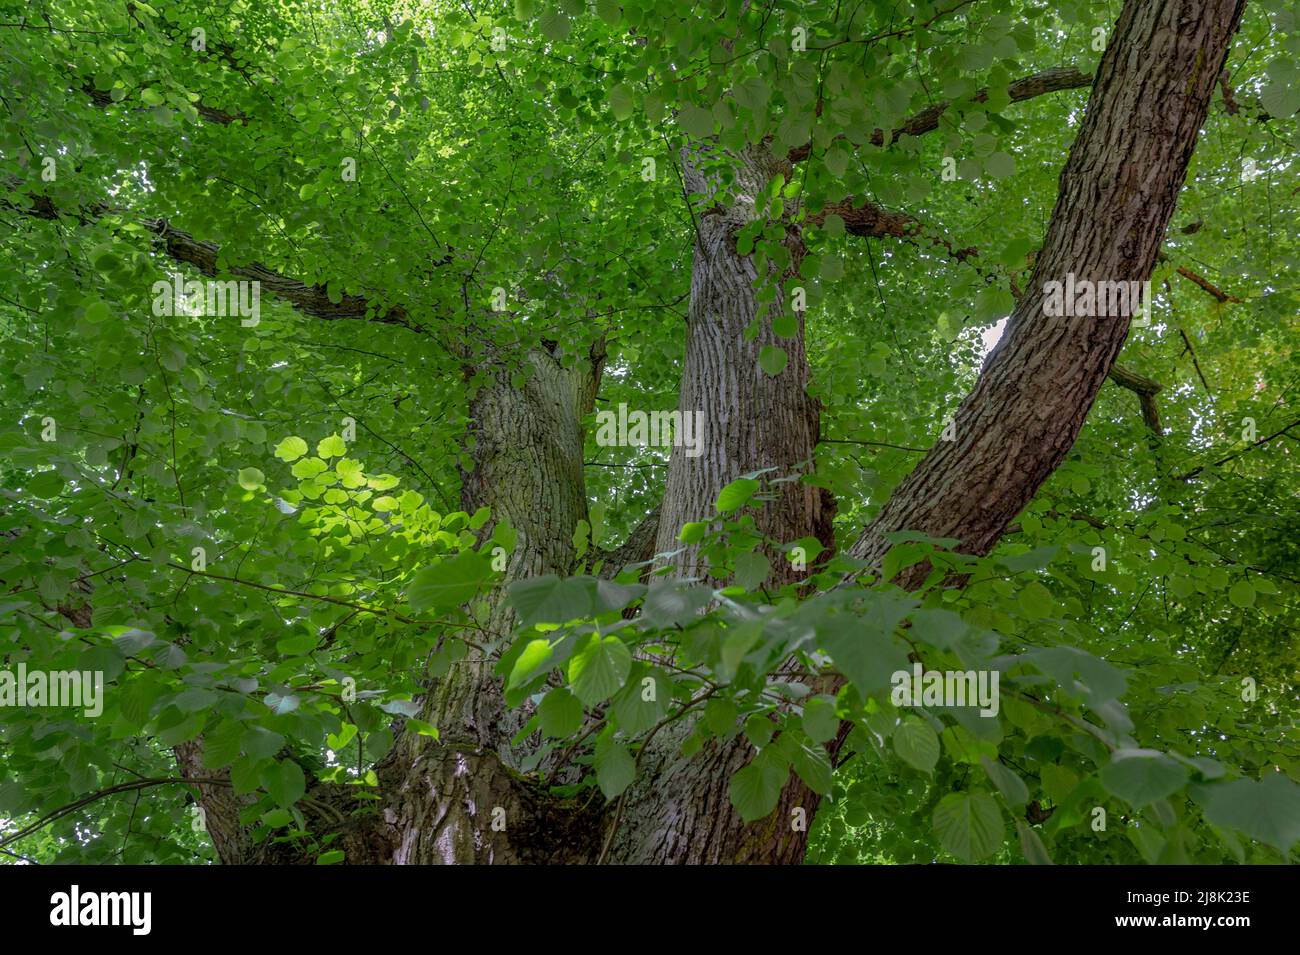 basswood, linden, lime tree (Tilia spec.), Klopstock basswood, basswood next to the Christianskirche and the grave of the poet Klopstock, Germany, Stock Photo